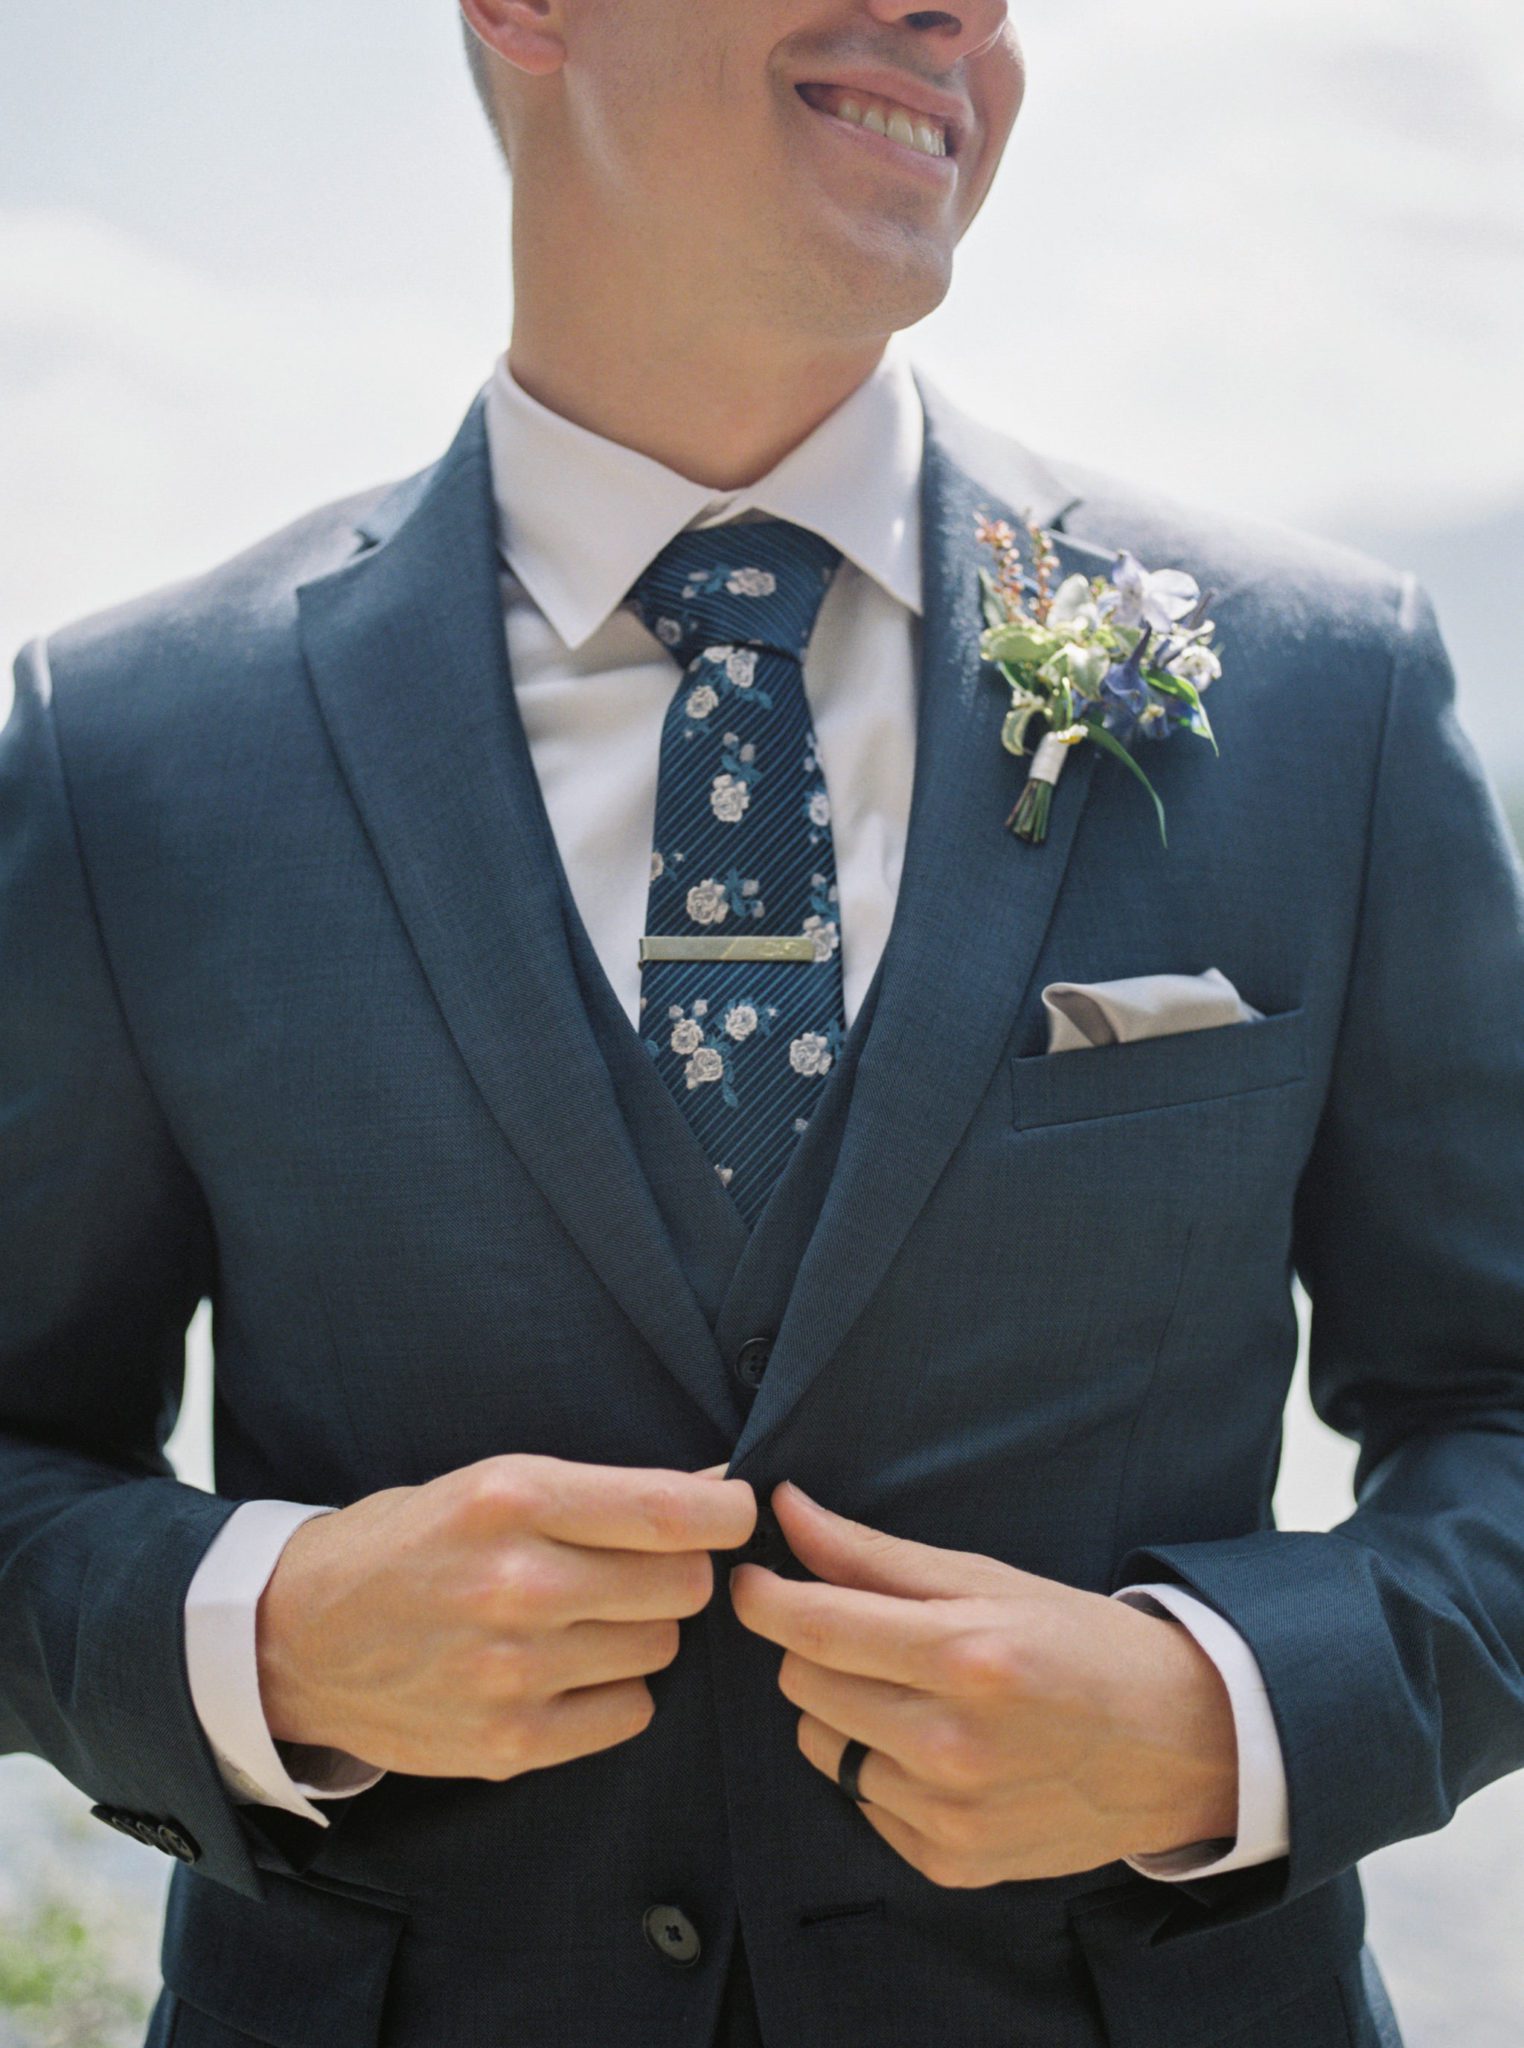 Floral tie inspiration in navy for a stylish groom